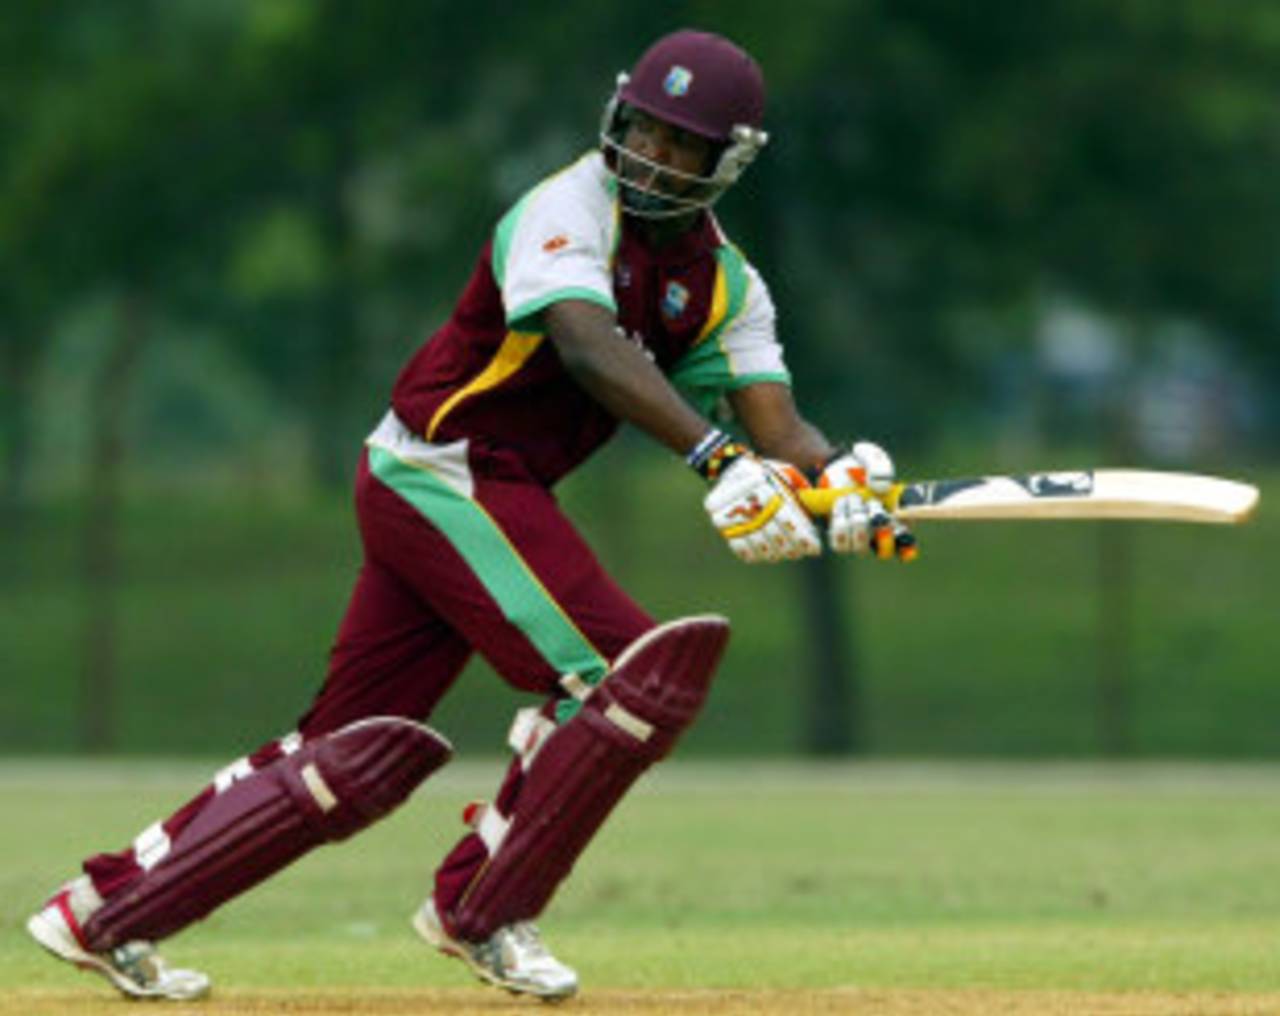 Darren Bravo in action, Nepal v West Indies, plate final, Under-19 World Cup, Kuala Lumpur, March 1, 2008